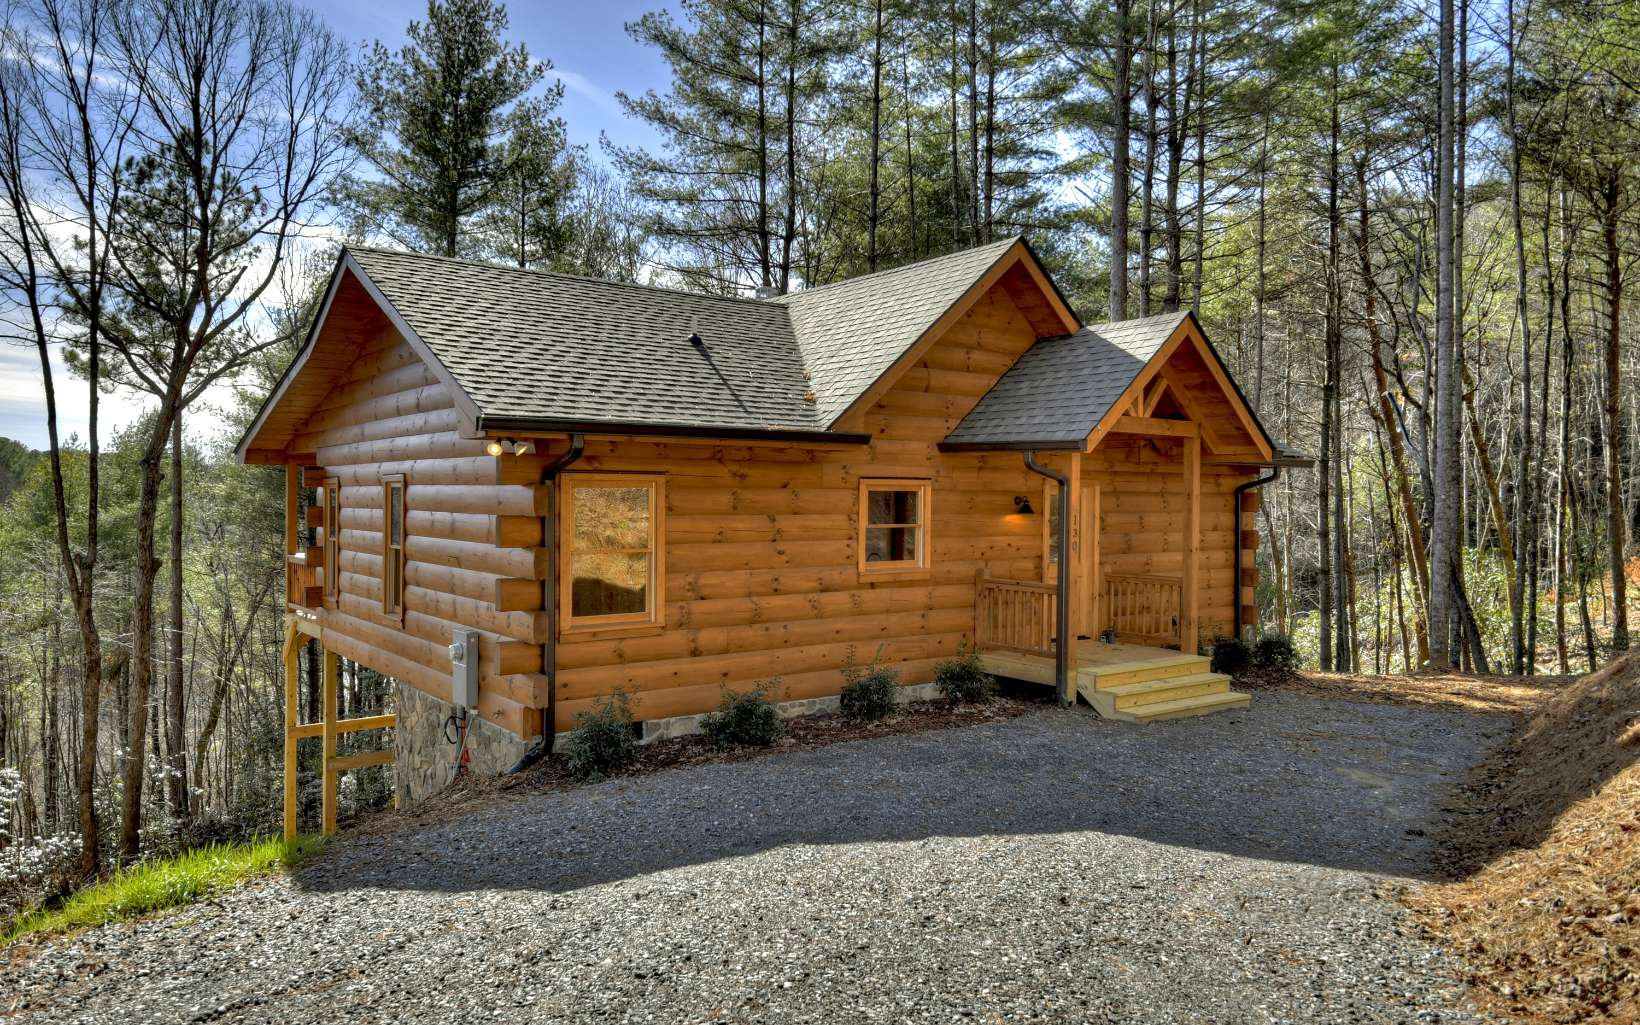 2x2x2: 2 bedrooms, 2 bathrooms, and "2" cute! Whether you’re considering part or full-time living or your next rental investment, this majestic charmer allows you to escape the cares of the world. You'll delight in taking the scenic route with mesmerizing views of farmlands, mountain, ponds, & creeks, and upon arrival, you’ll be greeted by a lovely ridgeline view of your own! This location offers easy all paved access to everything you desire in North Georgia, as it is conveniently situated between Ellijay and Blue Ridge. Other highlights of this warm & inviting haven include: open floorplan with one level living, soaring ceilings emphasized by natural light & exposed beams, floor-to-ceiling stacked stone fireplace, hardwoods & rustic accents throughout, easy to maintain landscaping, and a spacious lot for room to roam complete with Lake Whitepath frontage. Are you ready to make those mountain memories?